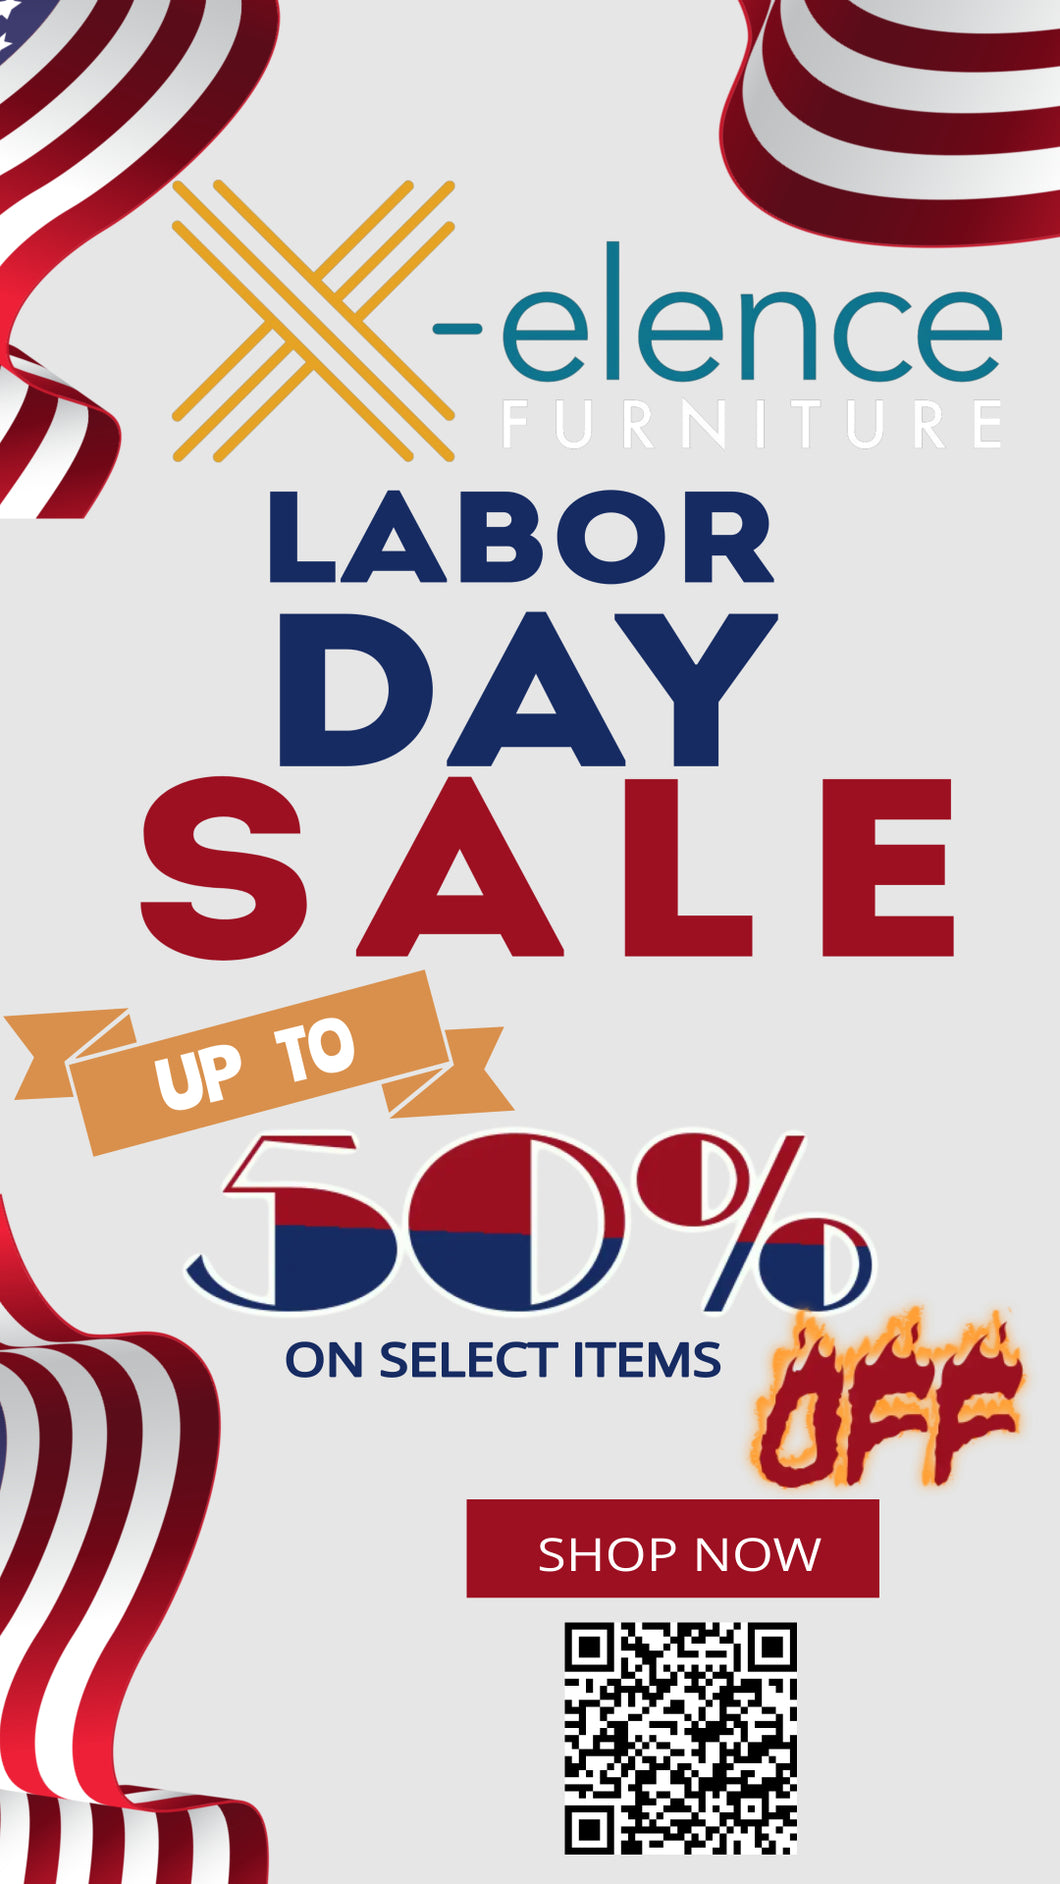 LABOR DAY SPECIAL SALE